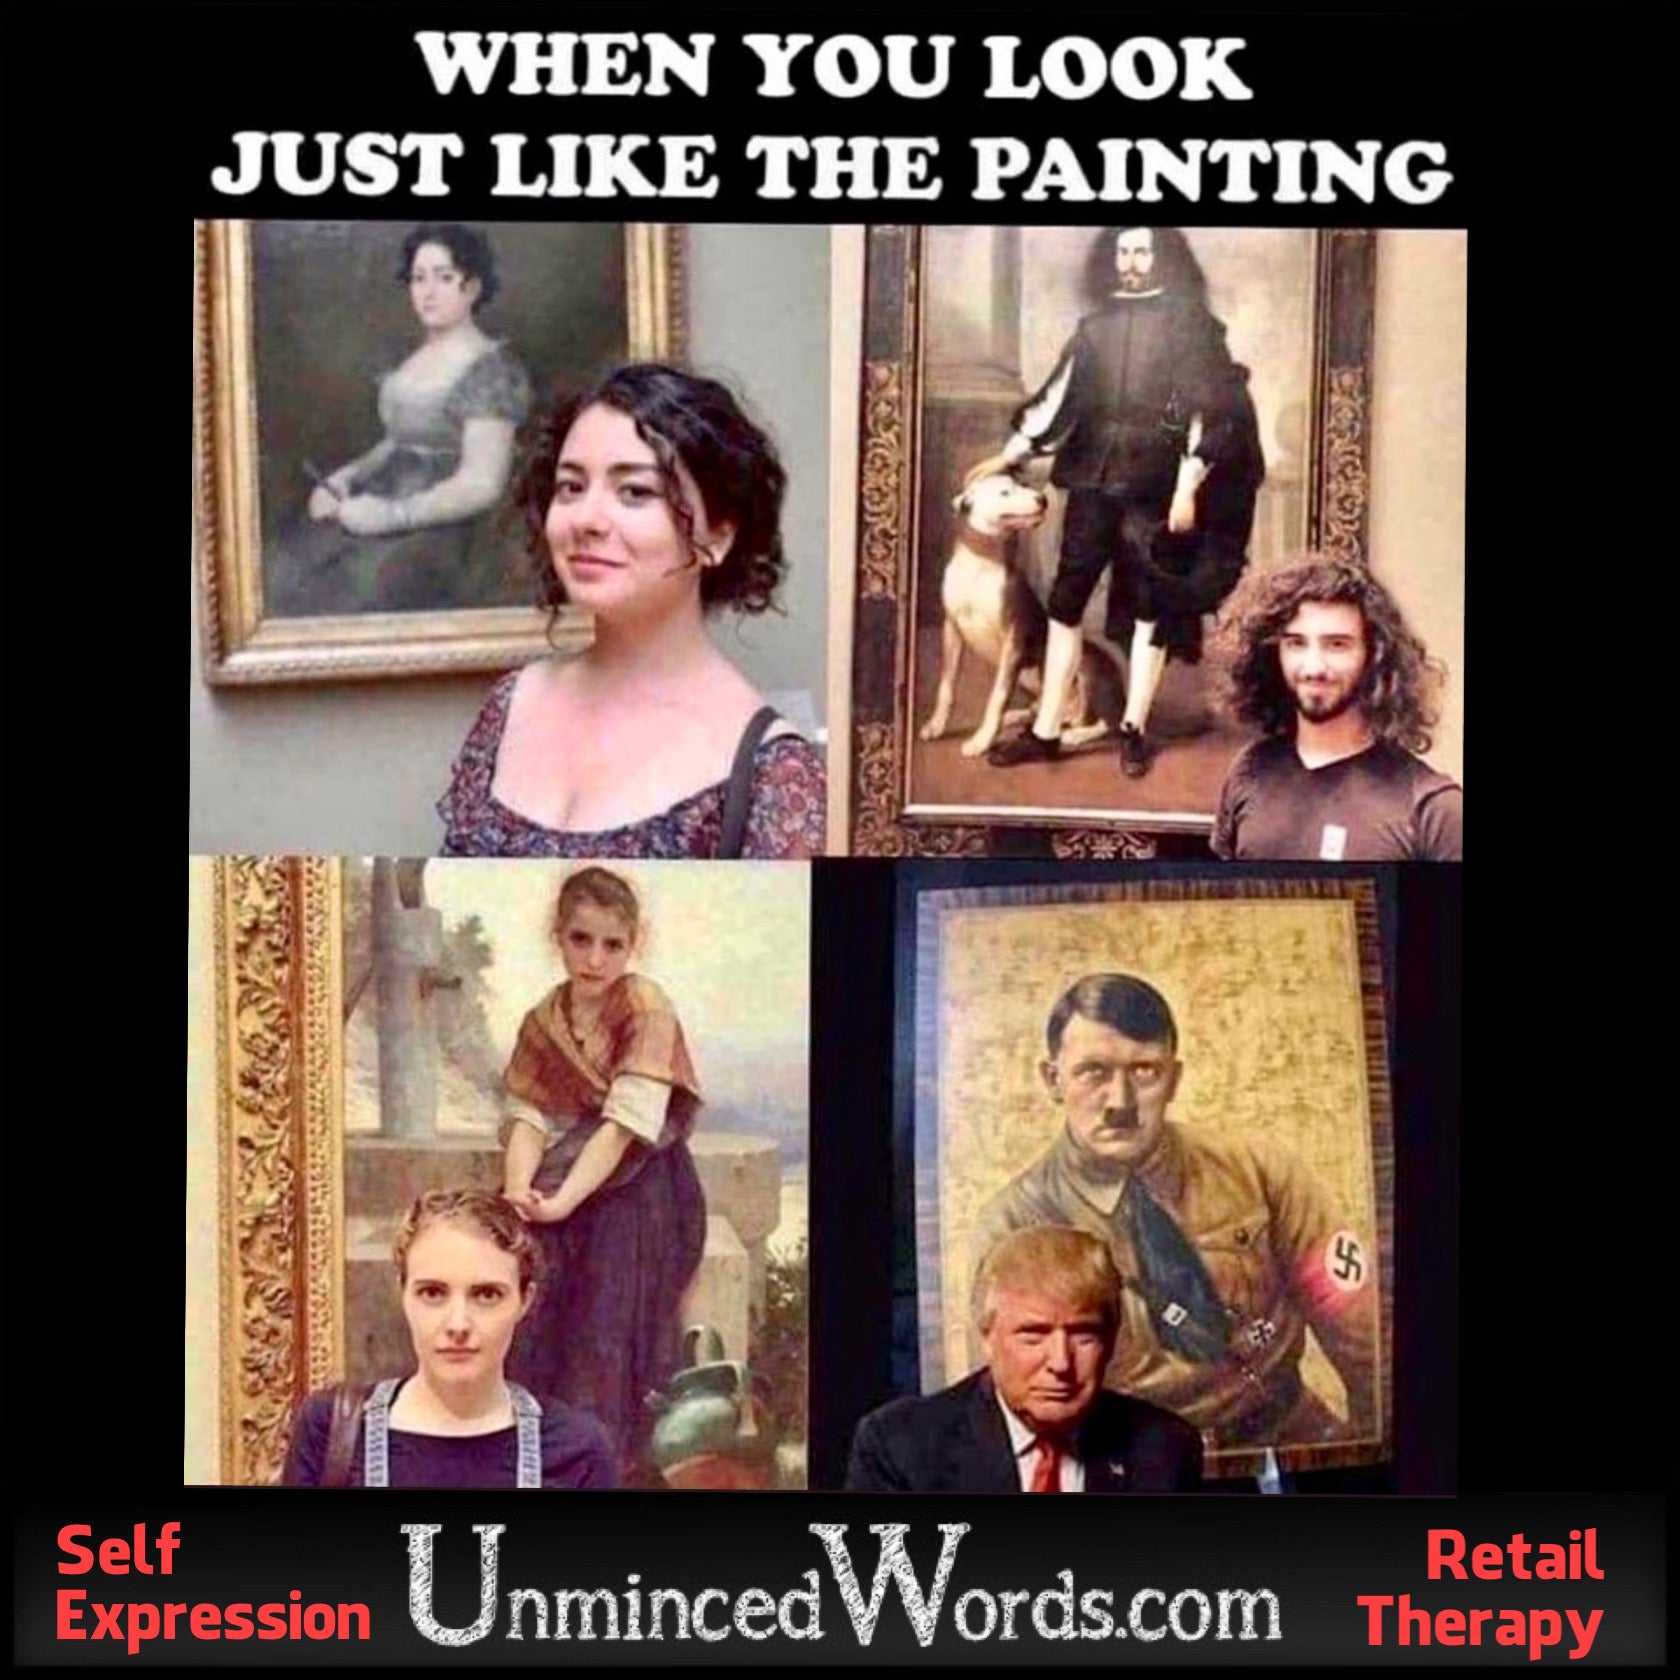 When you look just like the painting